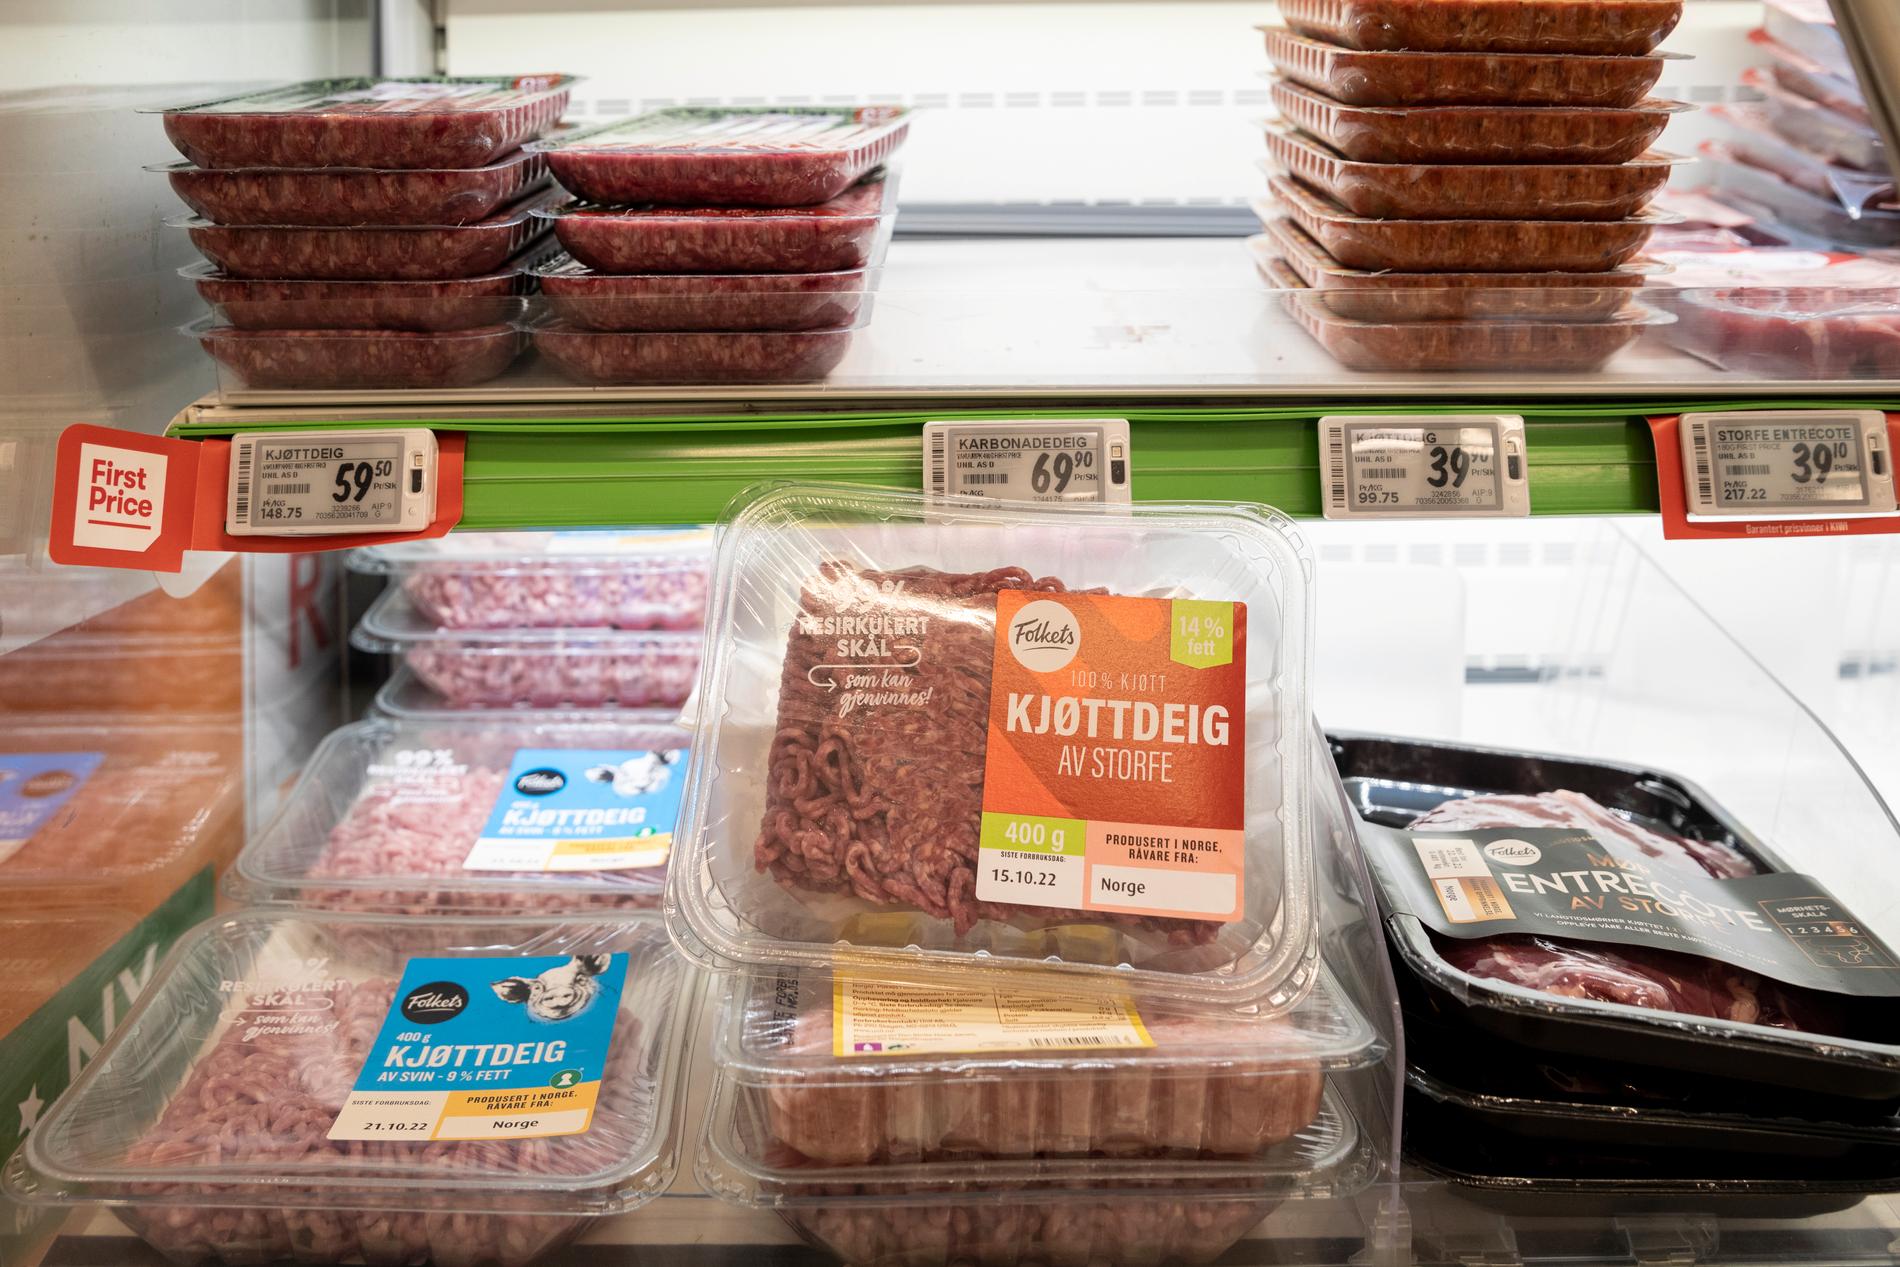 Price reduction on meat products: Nortura and Grocery Chains Cut Prices to Boost Sales